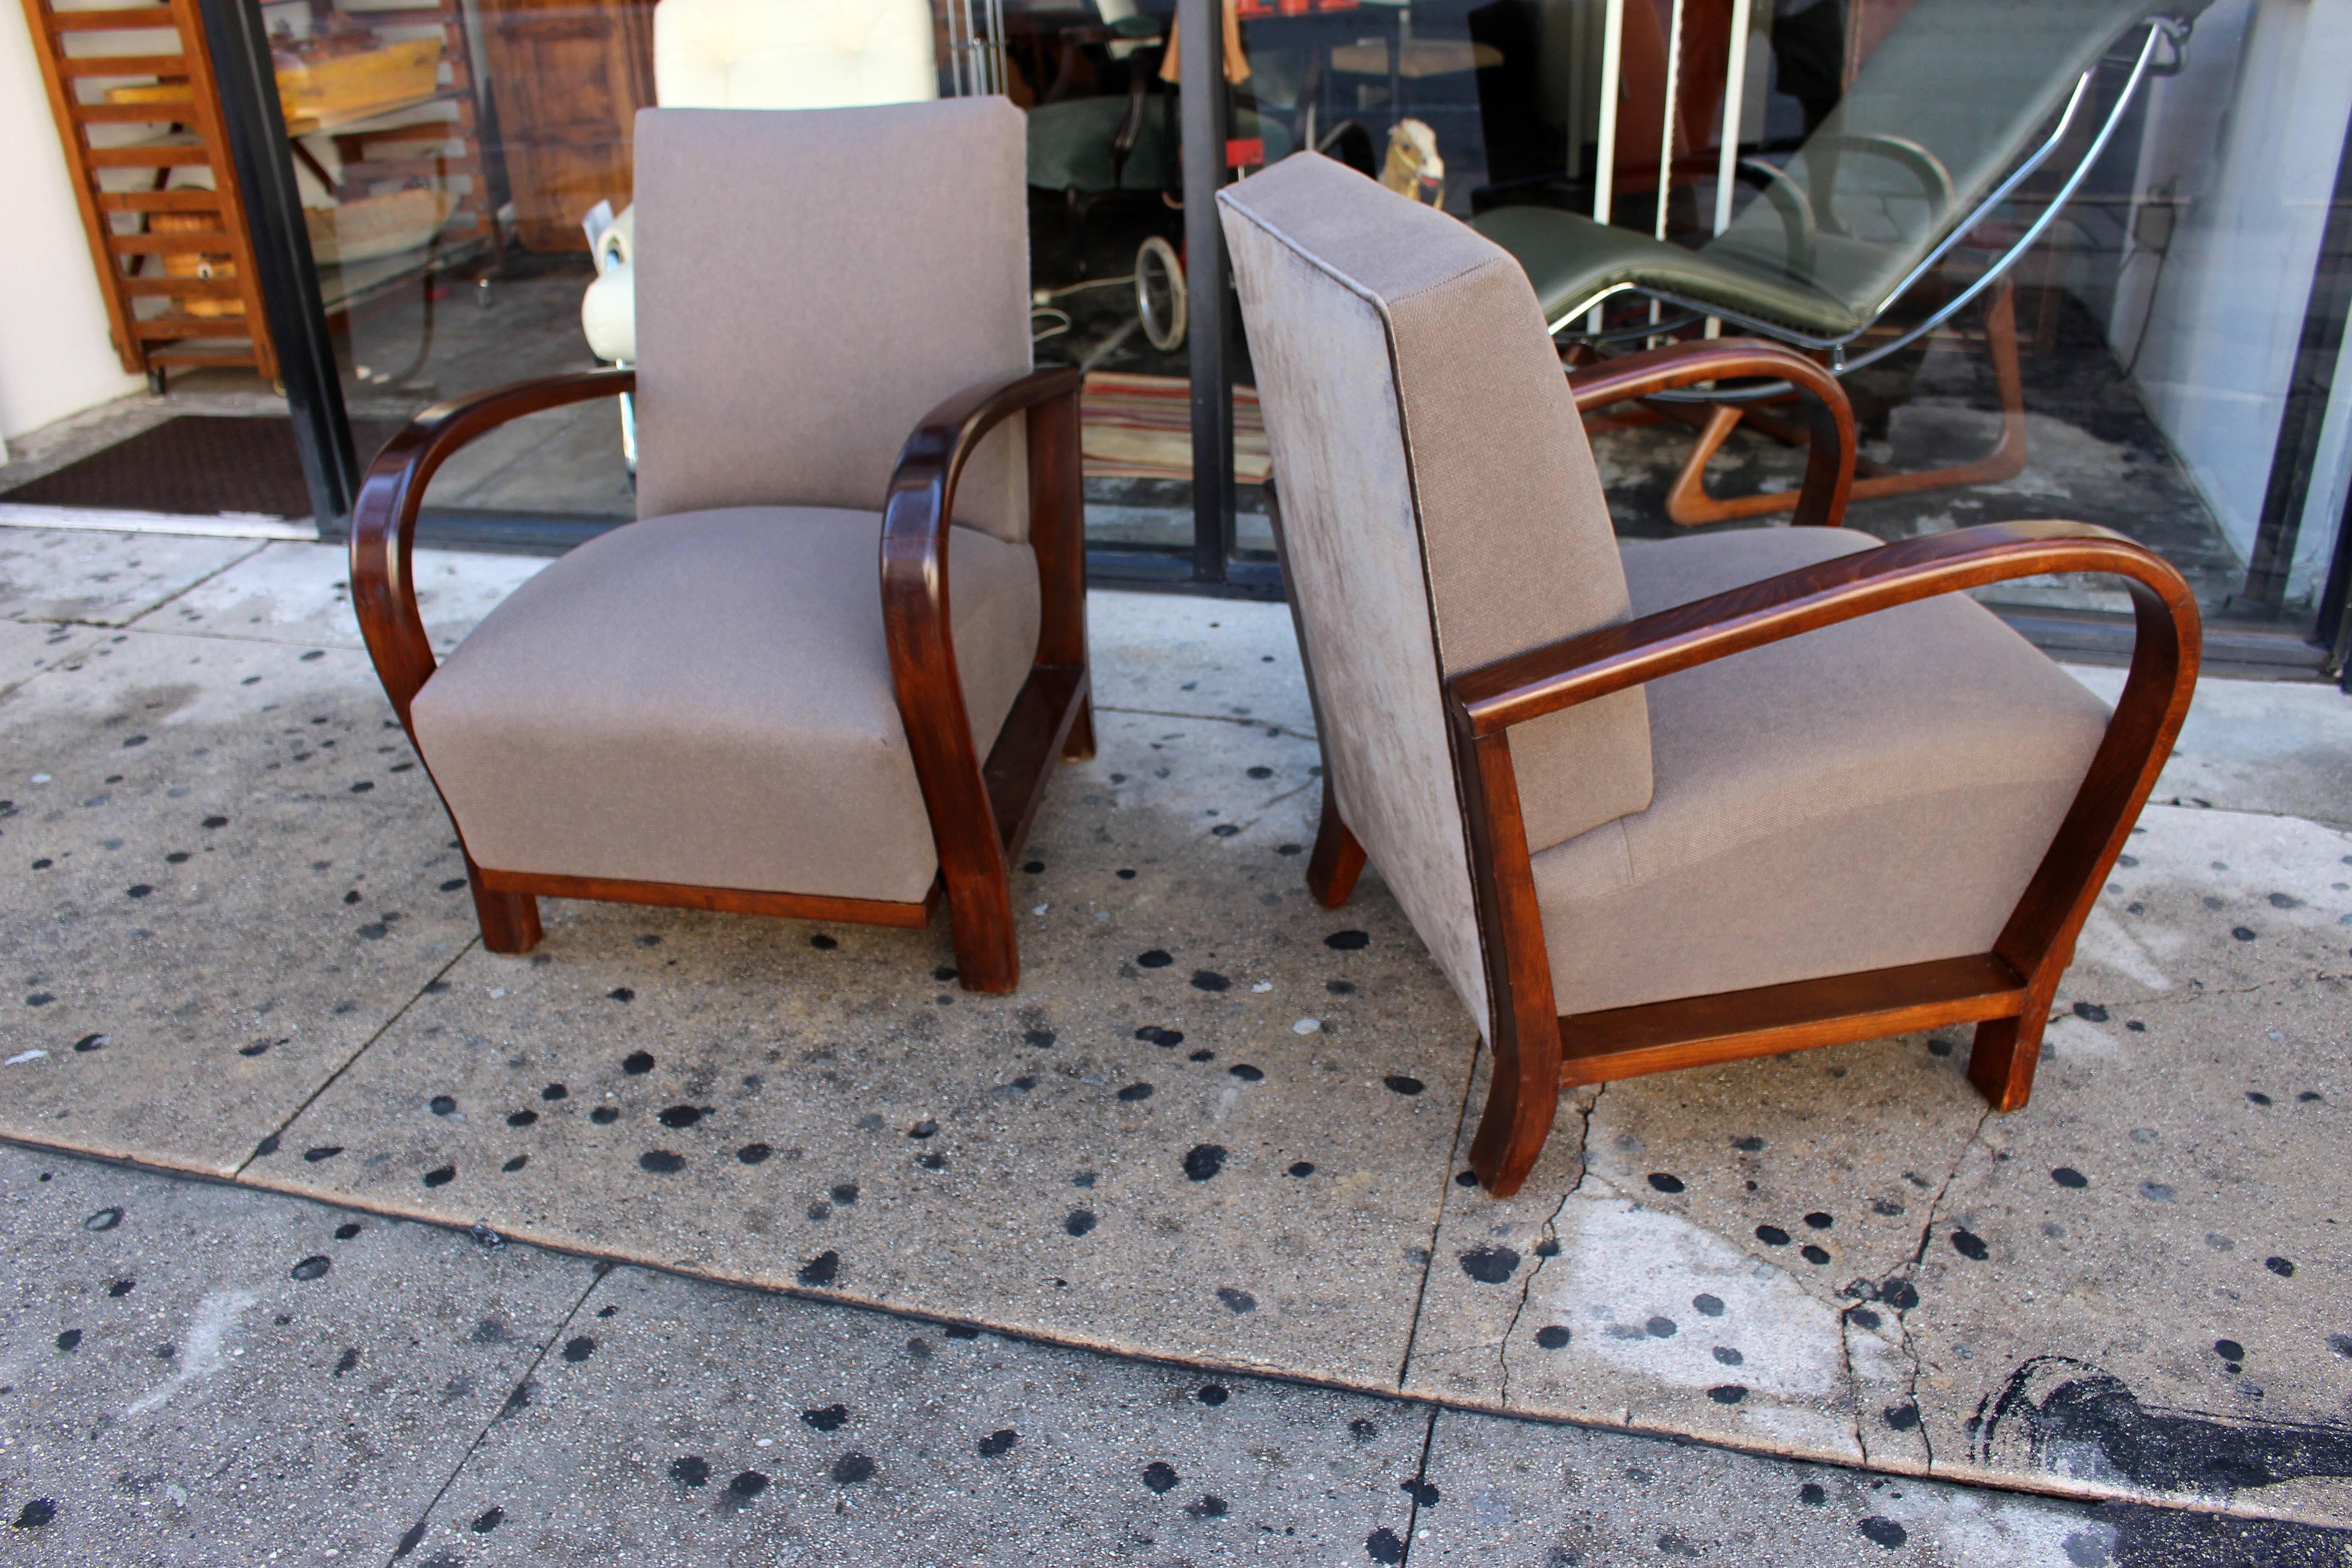 French Art Deco 1930s original chairs table and table lamp.
Chairs reupholstered two ton gray velvet on the back and the Italian cotton fabric in-front of the chairs. Selling as the set but it is possible to separate the set. 
Dimensions:
Table: